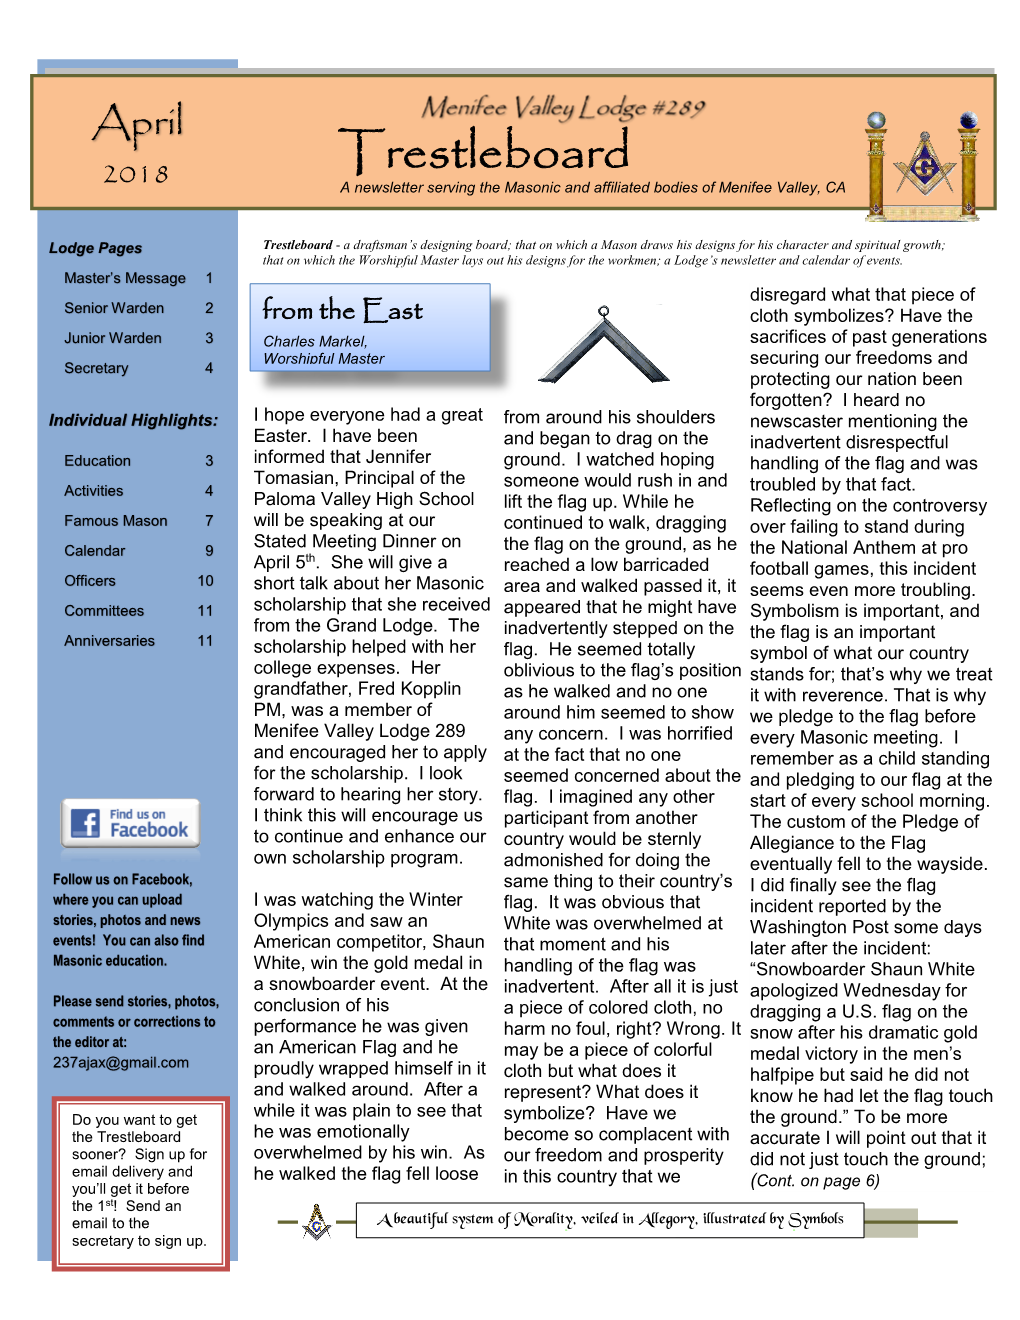 Trestleboard 2018 a Newsletter Serving the Masonic and Affiliated Bodies of Menifee Valley, CA